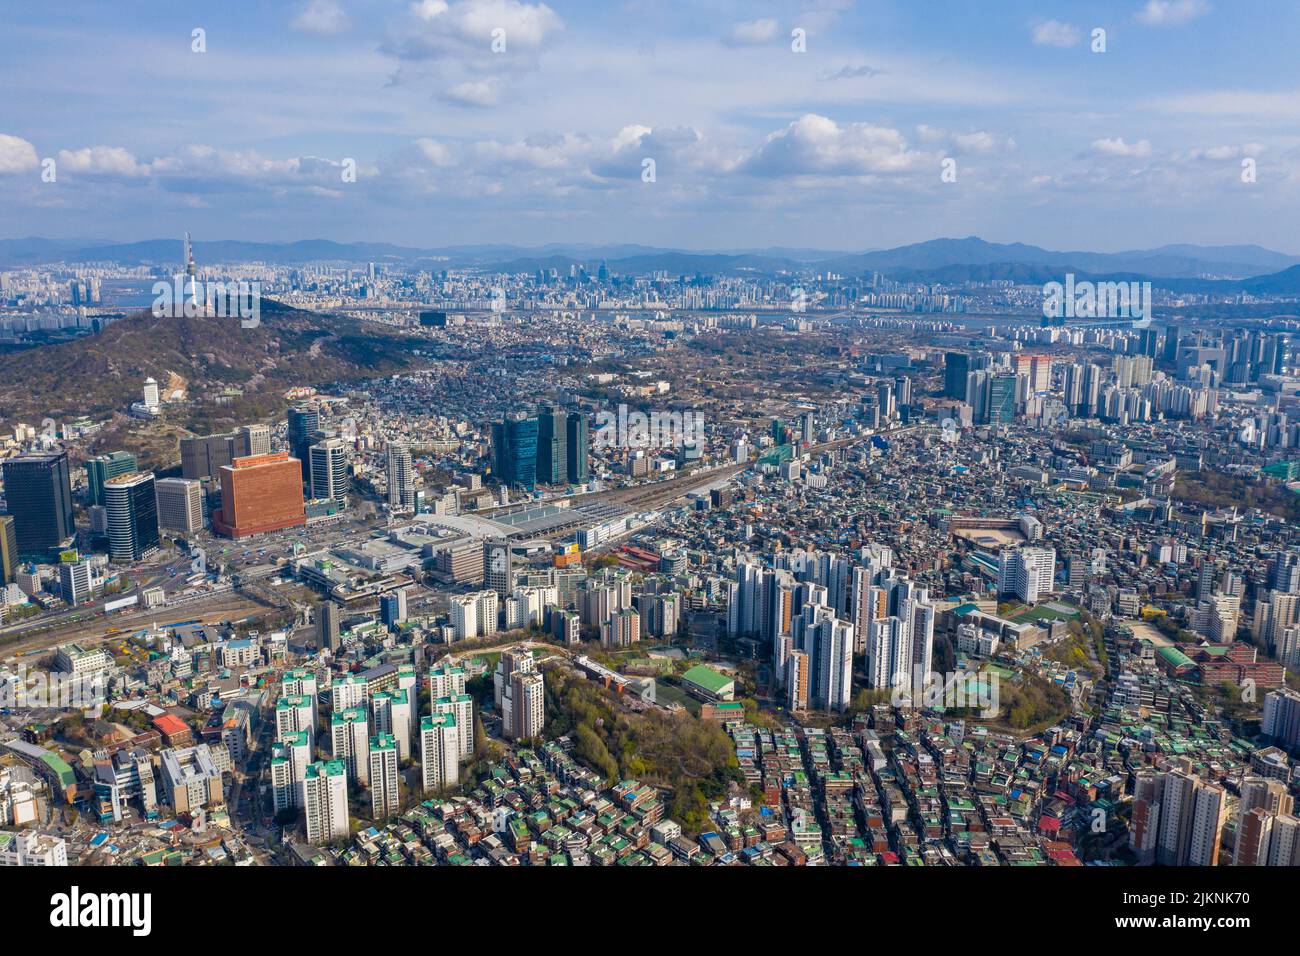 An aerial cityscape of Seoul surrounded by buildings under blue bright sky Stock Photo